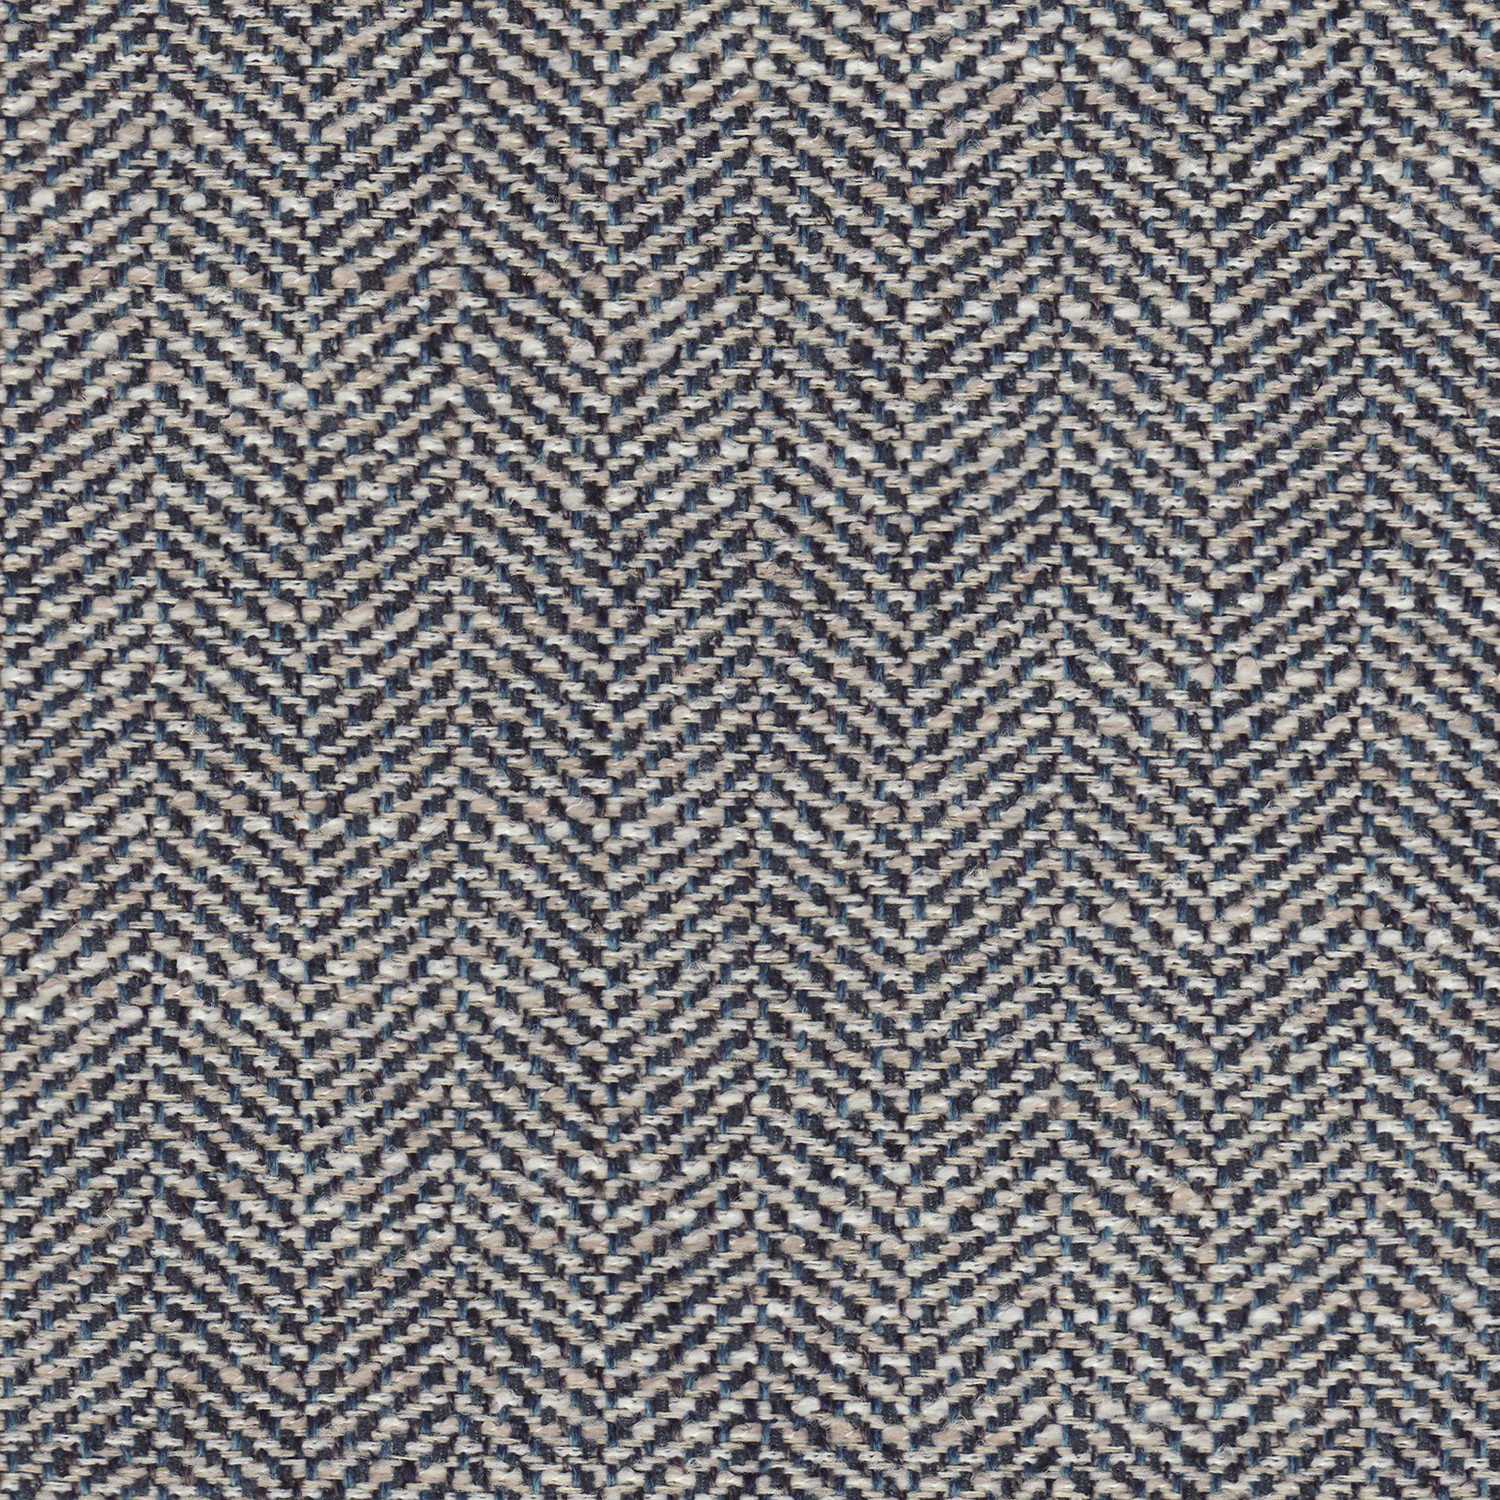 WYPSY/NAVY - Upholstery Only Fabric Suitable For Upholstery And Pillows Only.   - Houston